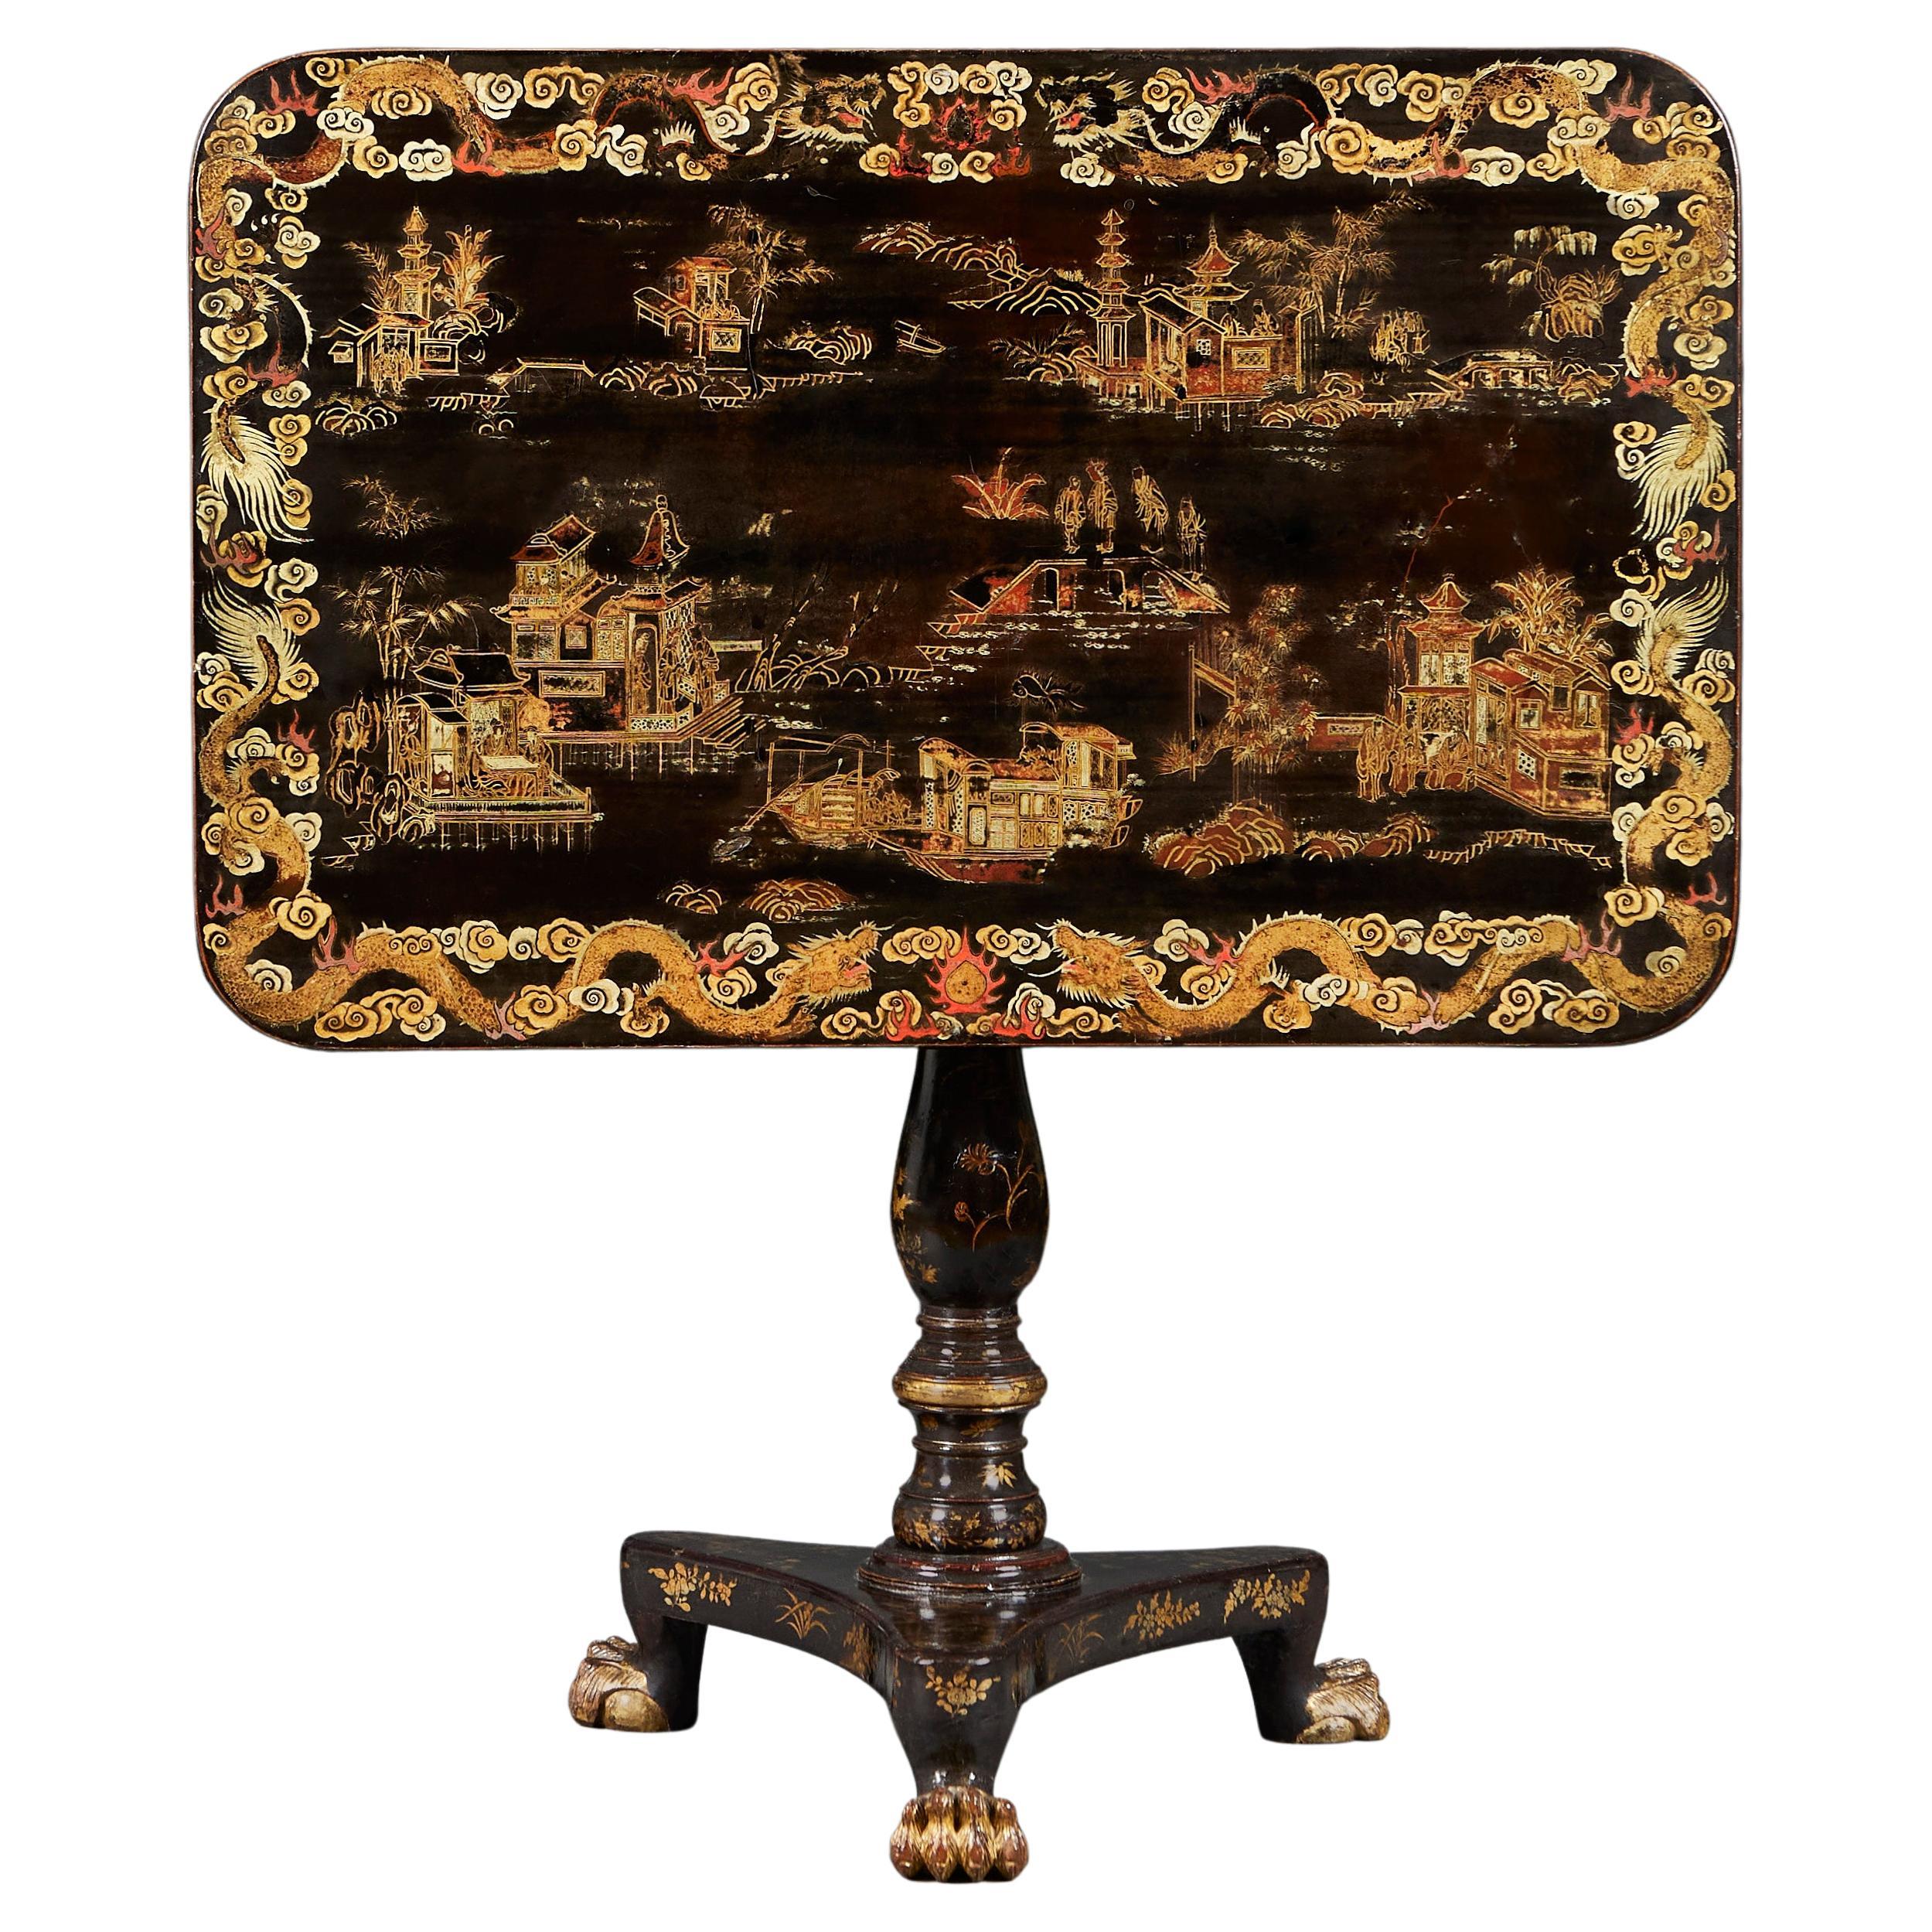 Mid-19th Century Chinese Export Lacquer Centre Table